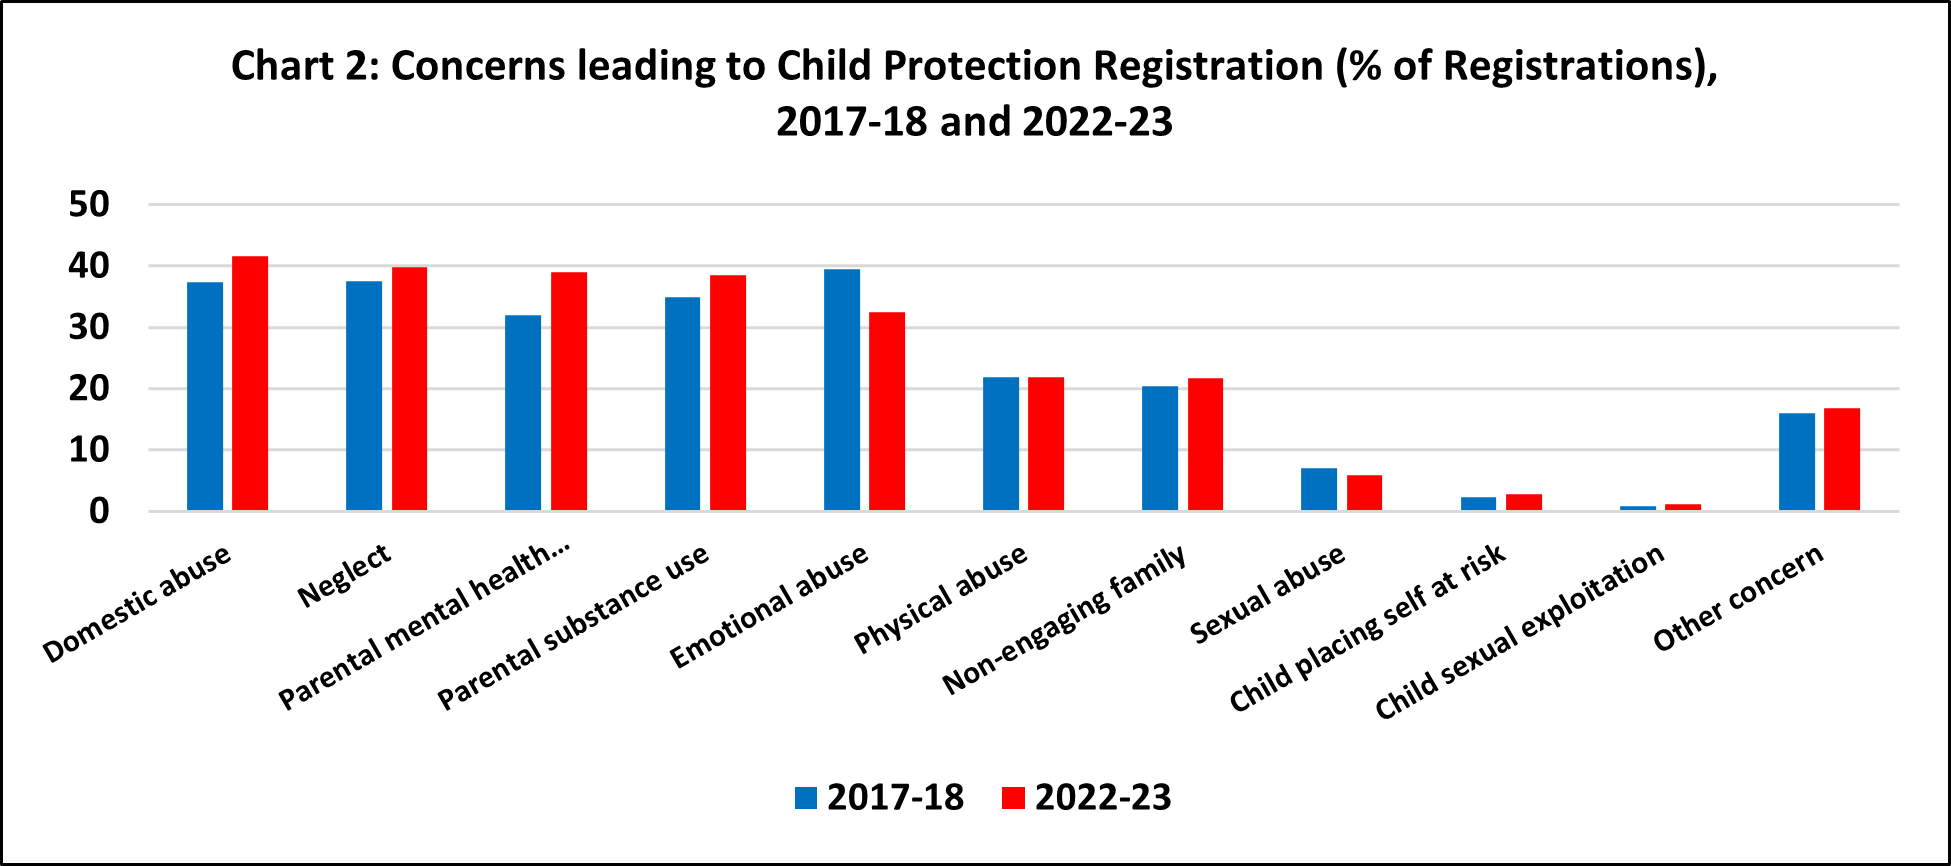 A chart showing the concerns leading to Child protection Registration by percentage in the periods 2017-18 and 2022-23.